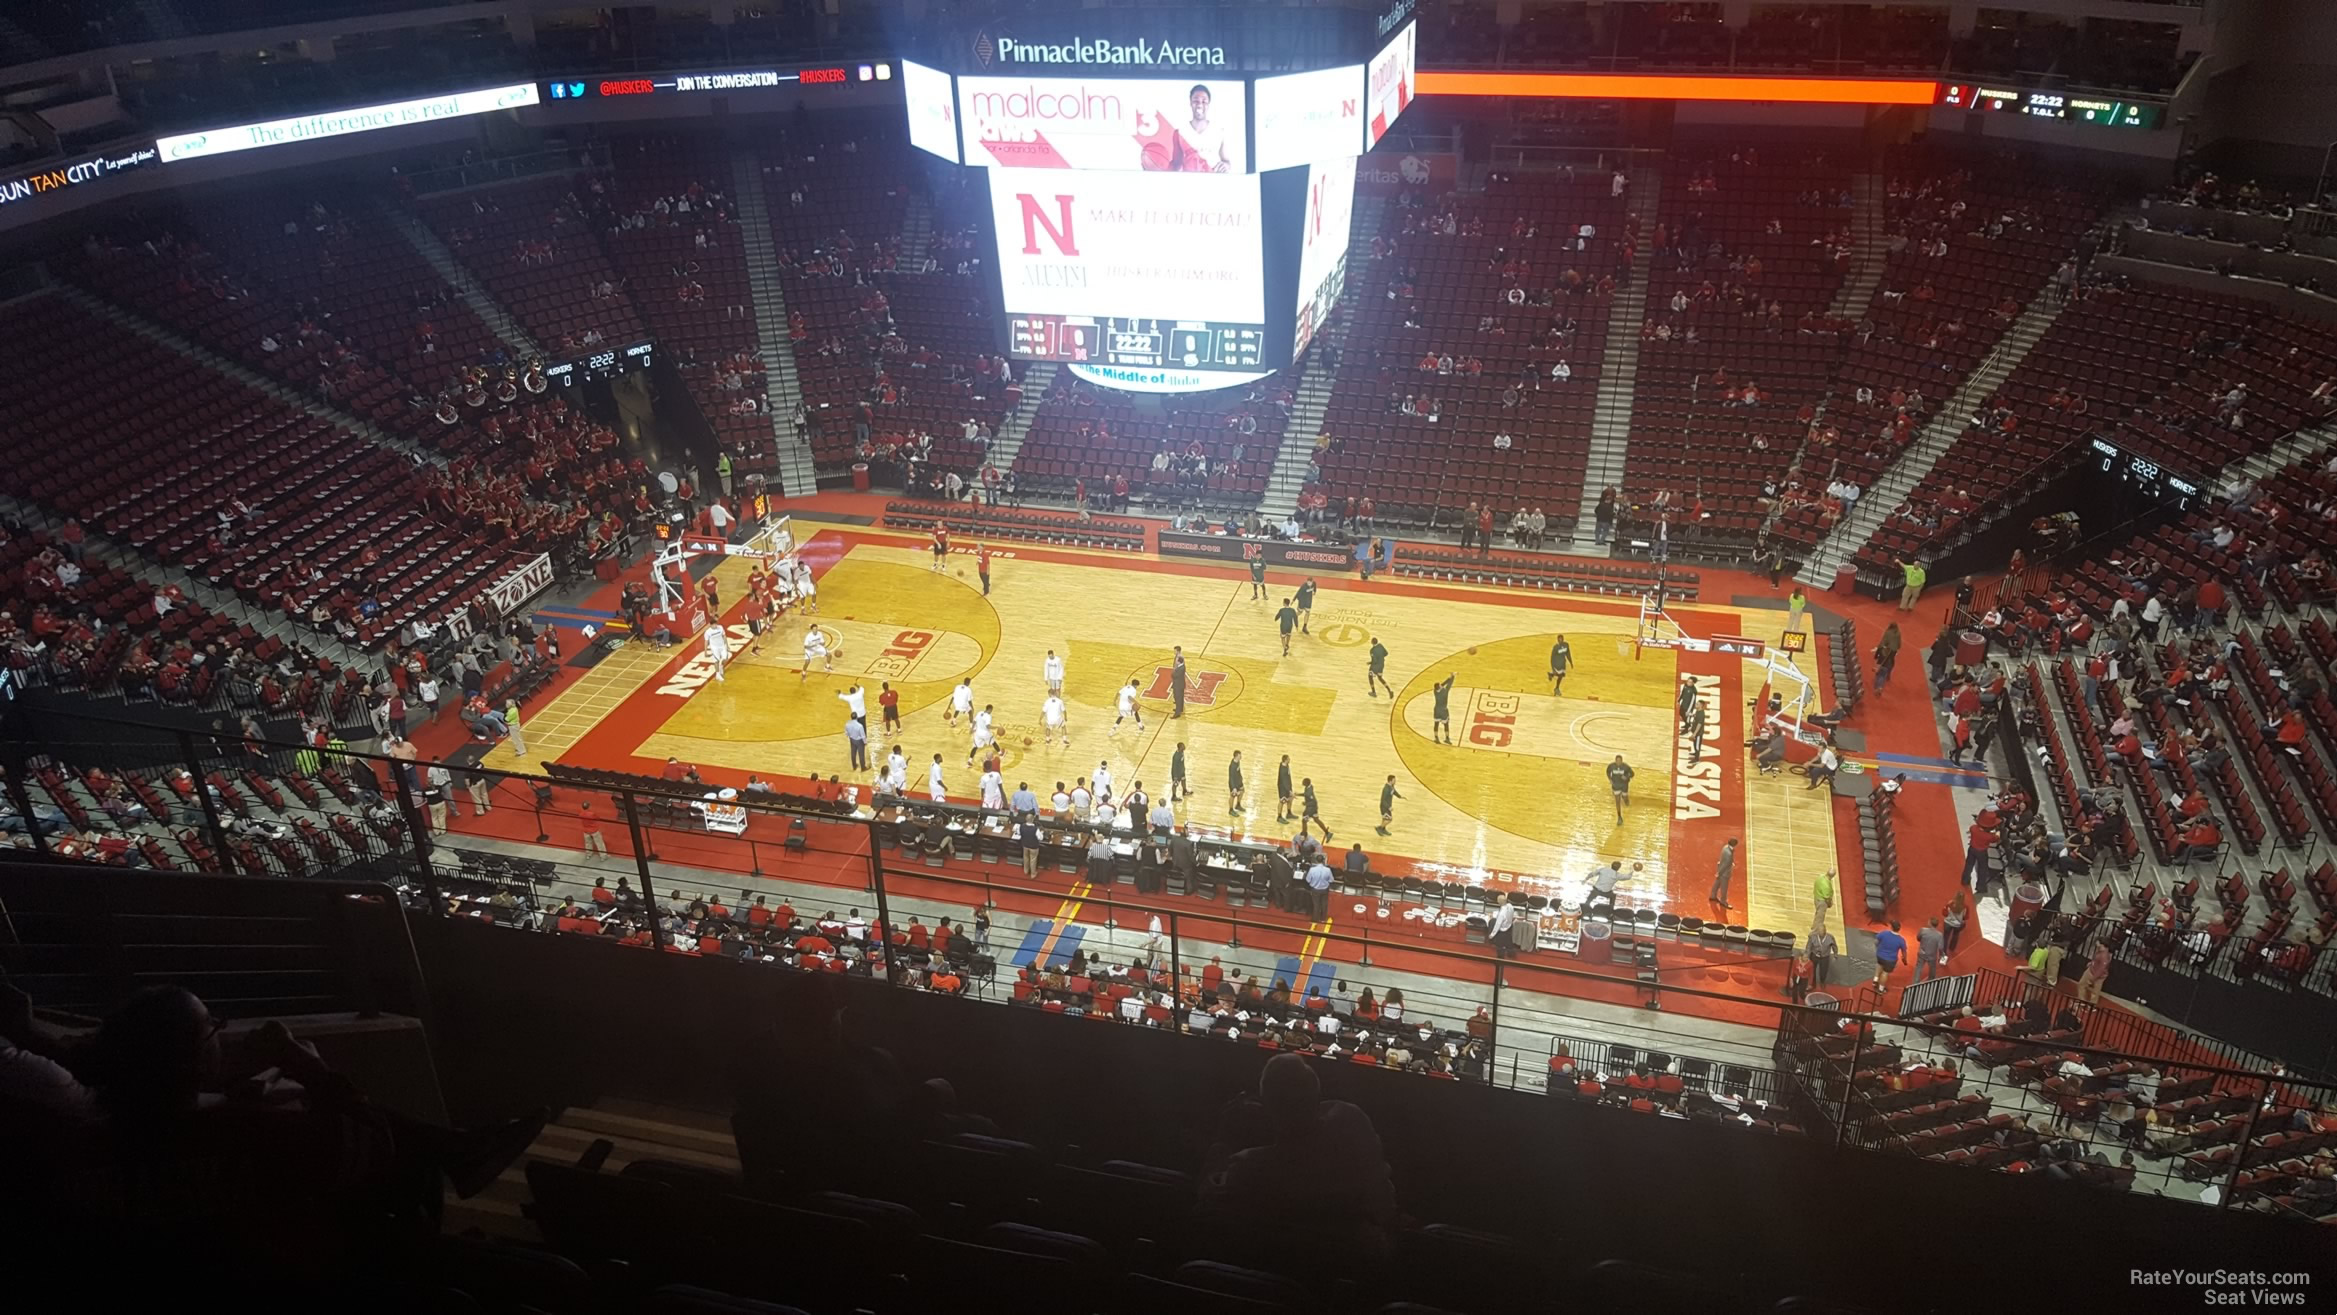 section 303, row 6 seat view  for basketball - pinnacle bank arena